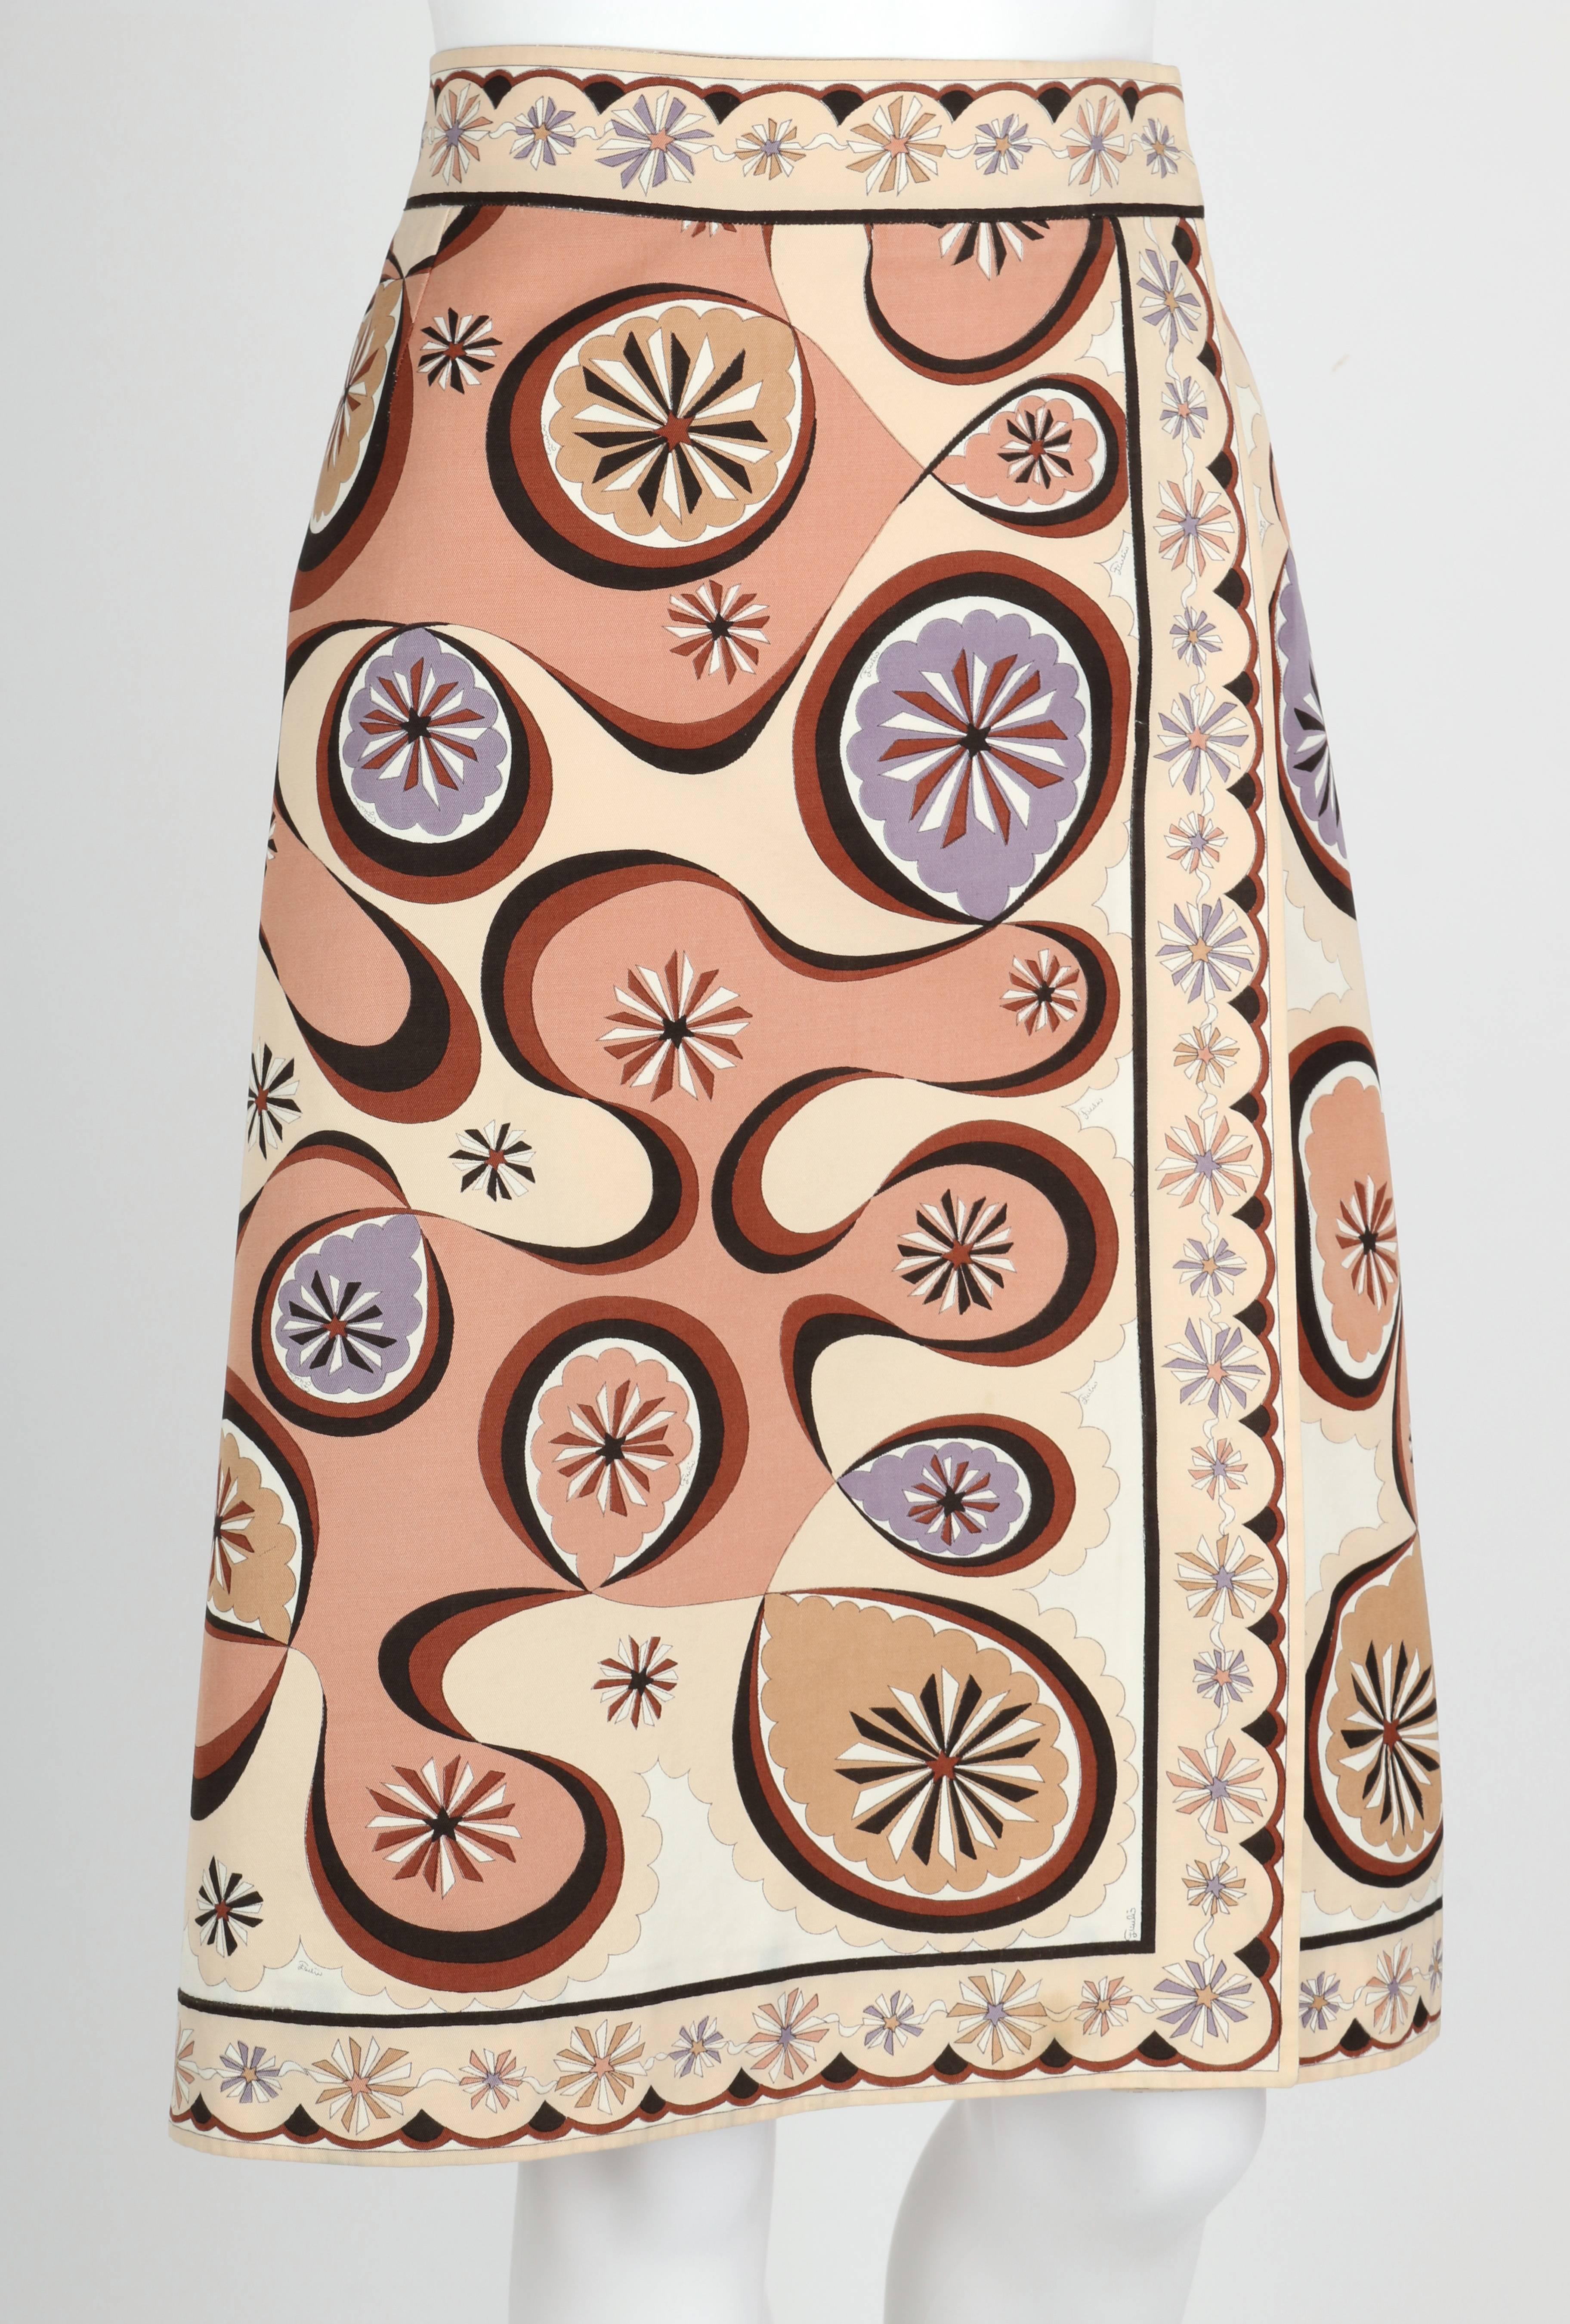 Vintage c.1970's Emilio Pucci beige and brown multicolor star burst signature print cotton wrap A-line skirt. Decorative scalloped op art border detail at waist, closure and hem. Wrap secures with snaps and hook/eye. Marked Fabric Content: 